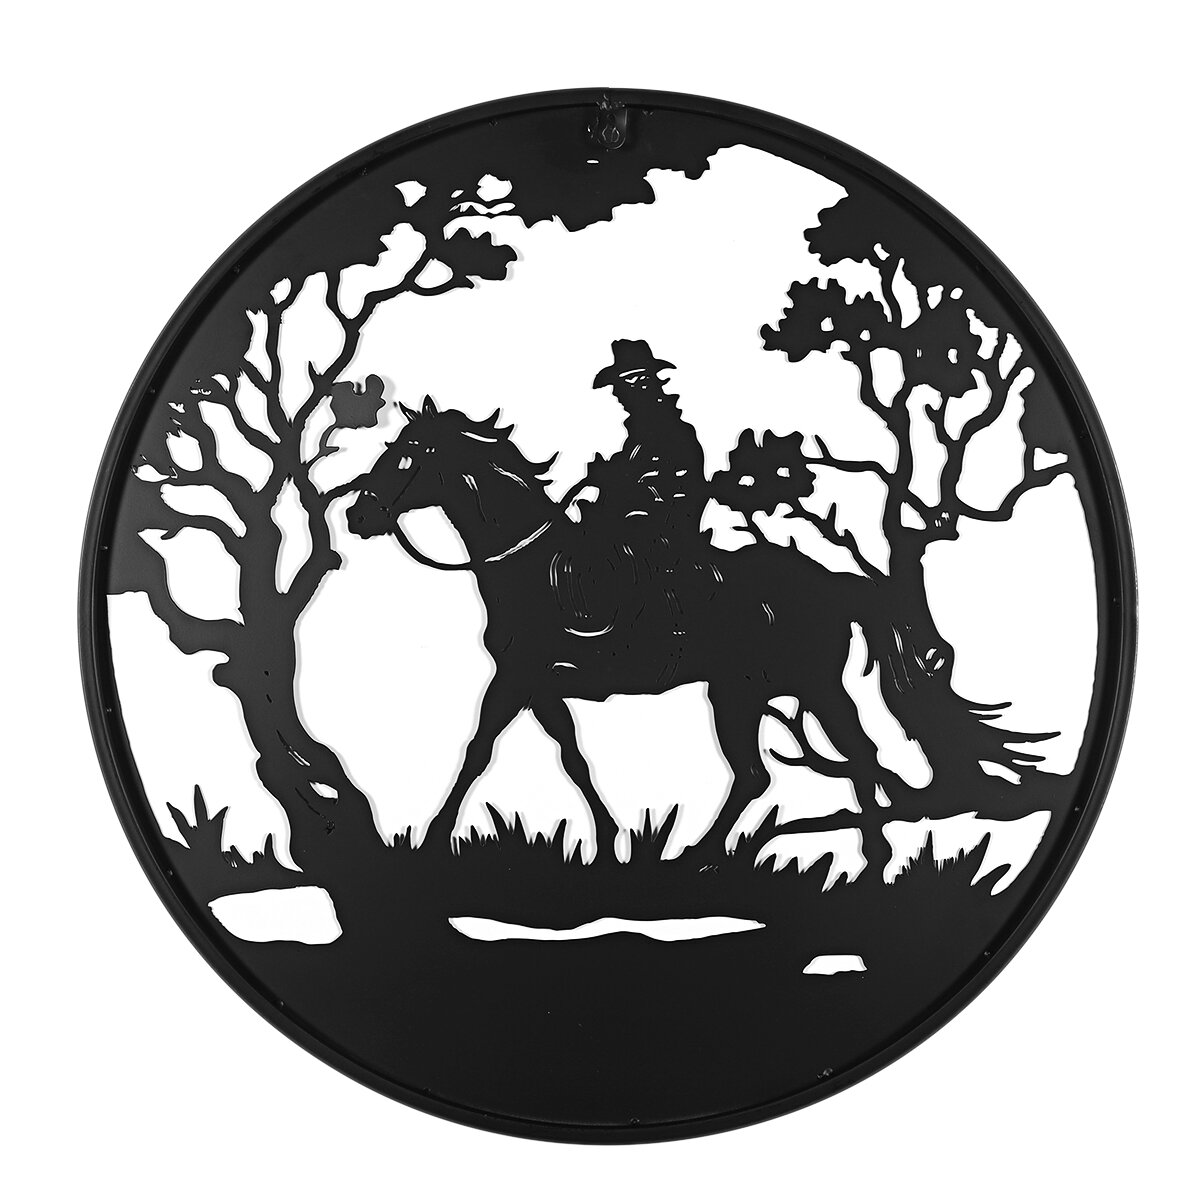 Image of Man Riding Horse In Forest Round Black Metal Wall Hanging Art Decoration Room